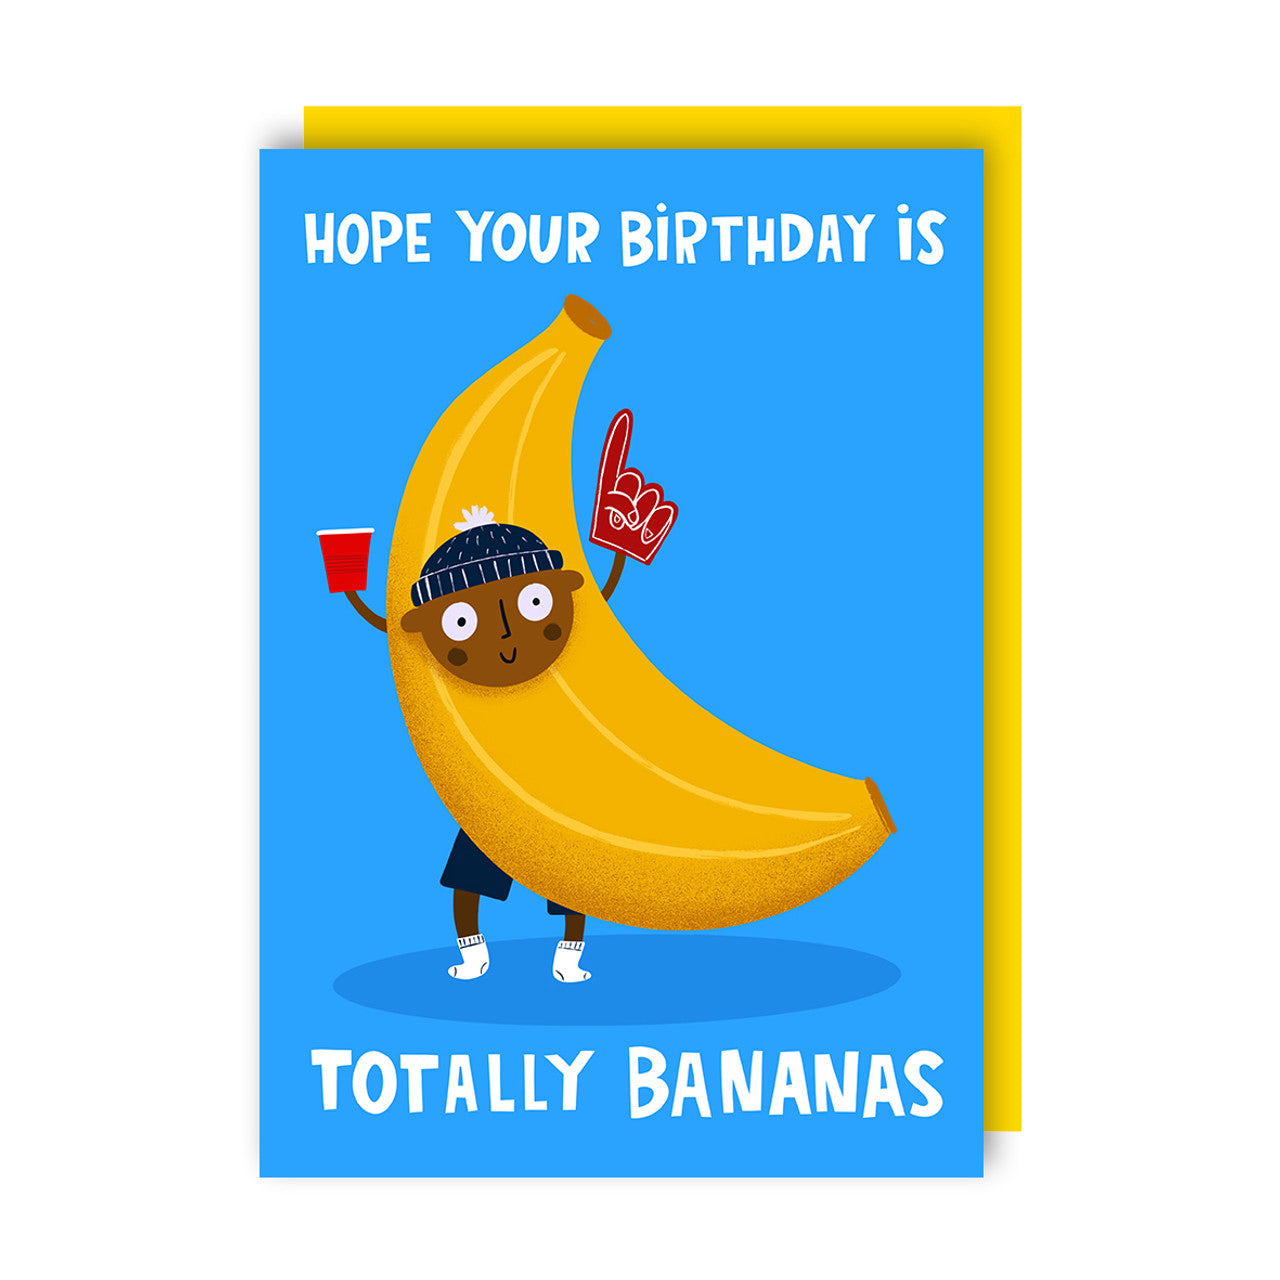 Kids Birthday Card text reads "Hope your birthday is totally bananas"